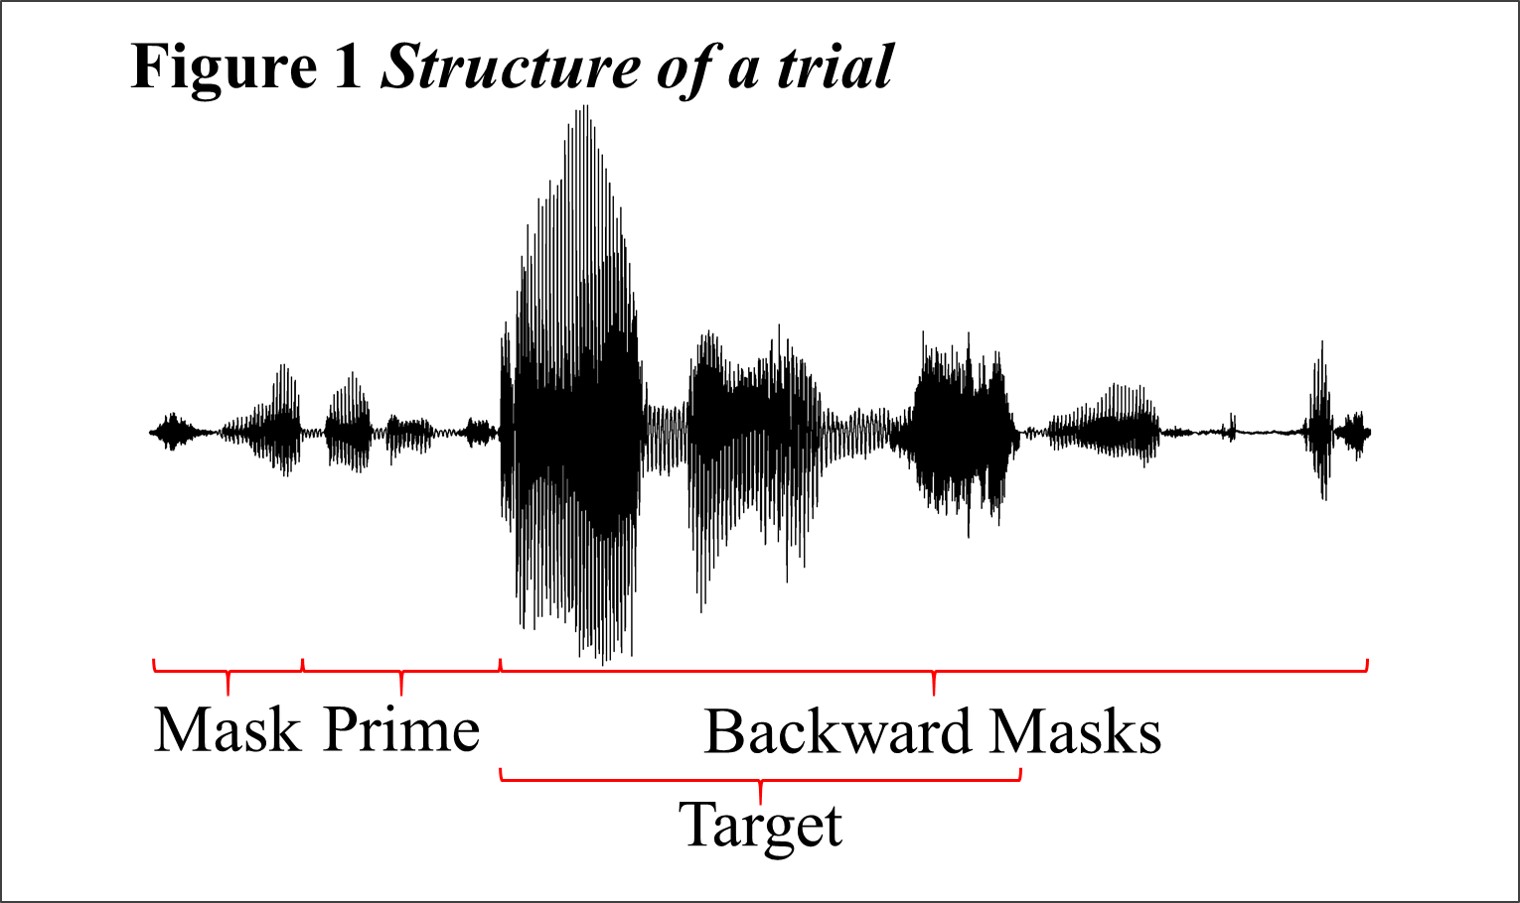 Structure of a trial in an auditory masked priming experiment